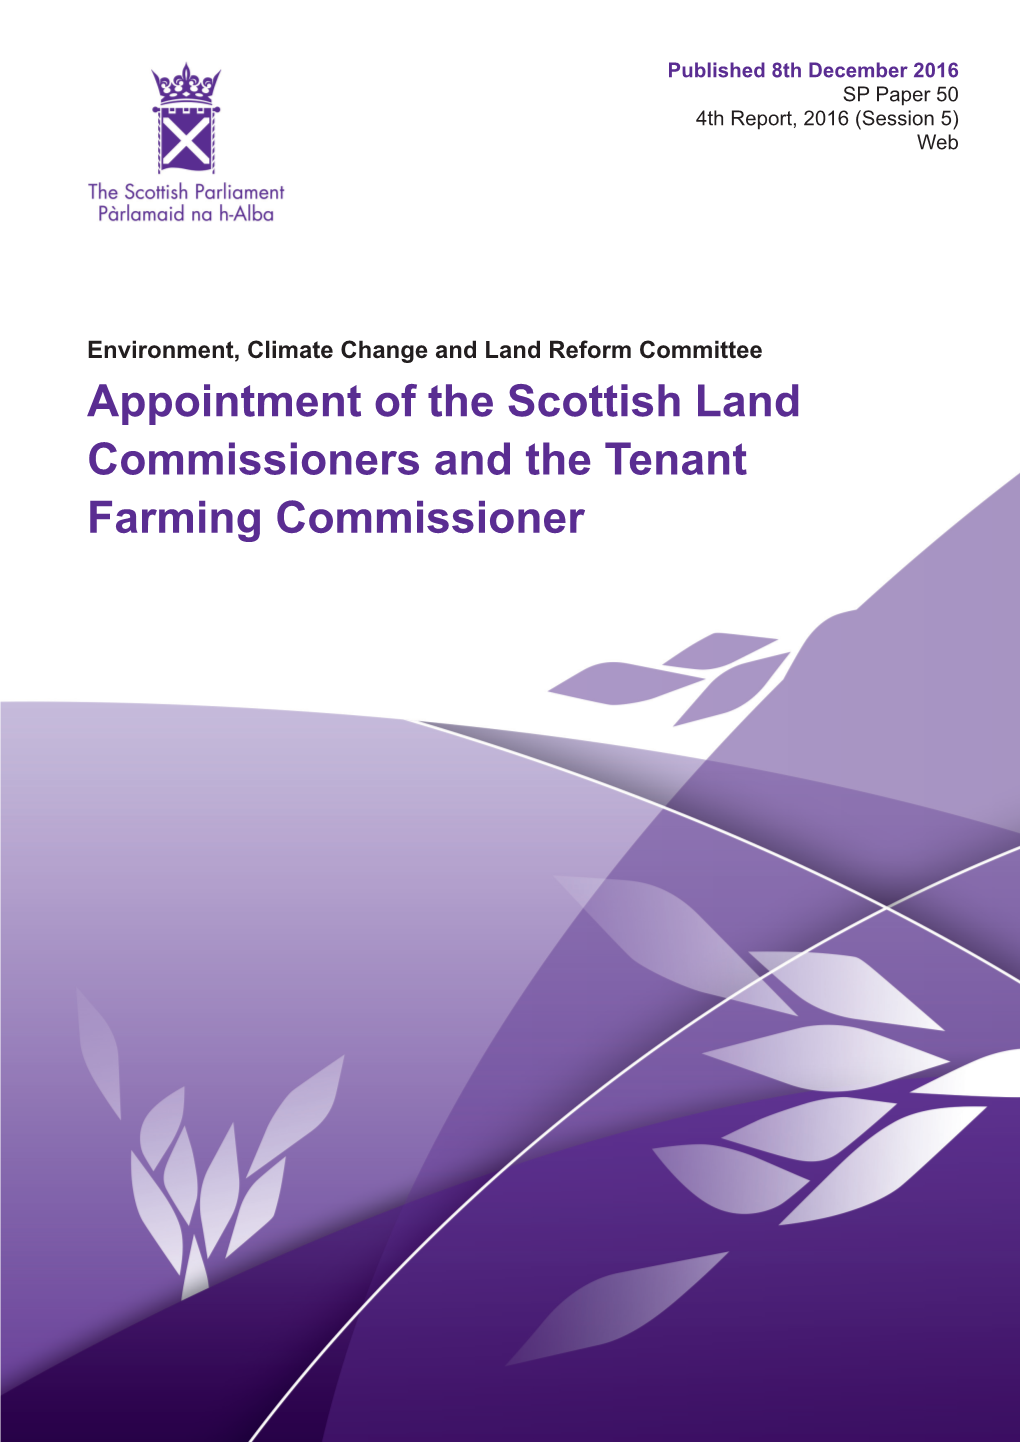 Environment, Climate Change and Land Reform Committee Appointment of the Scottish Land Commissioners and the Tenant Farming Commissioner